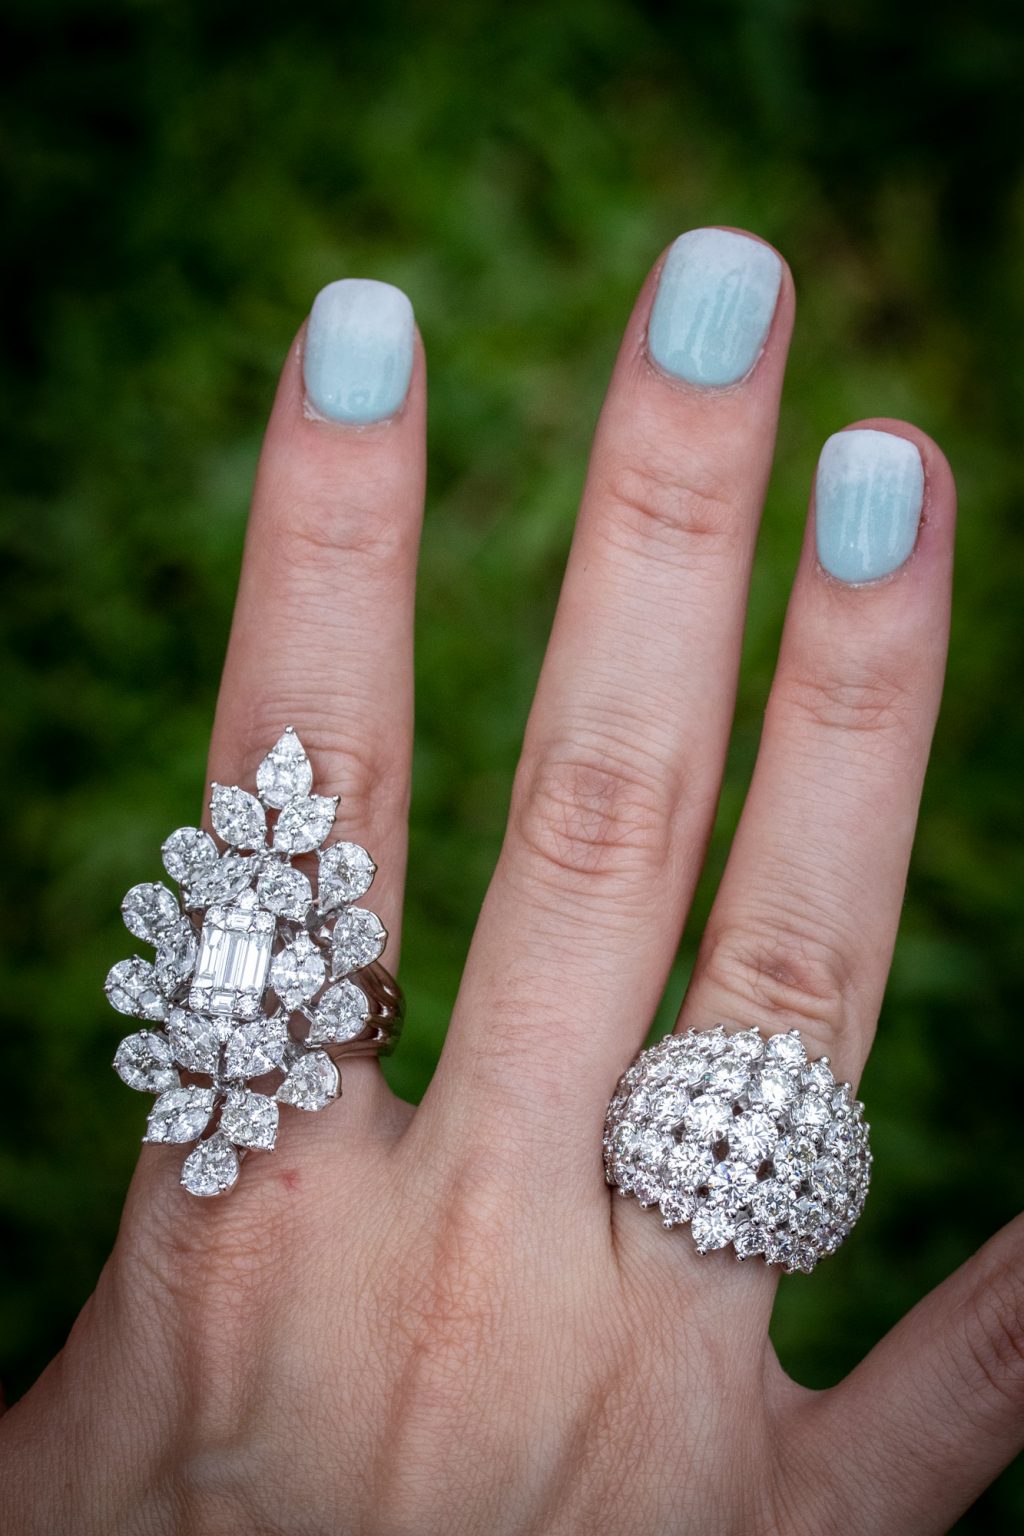 12 Diamond Cocktail Rings That Will Make A Powerful Statement 2091